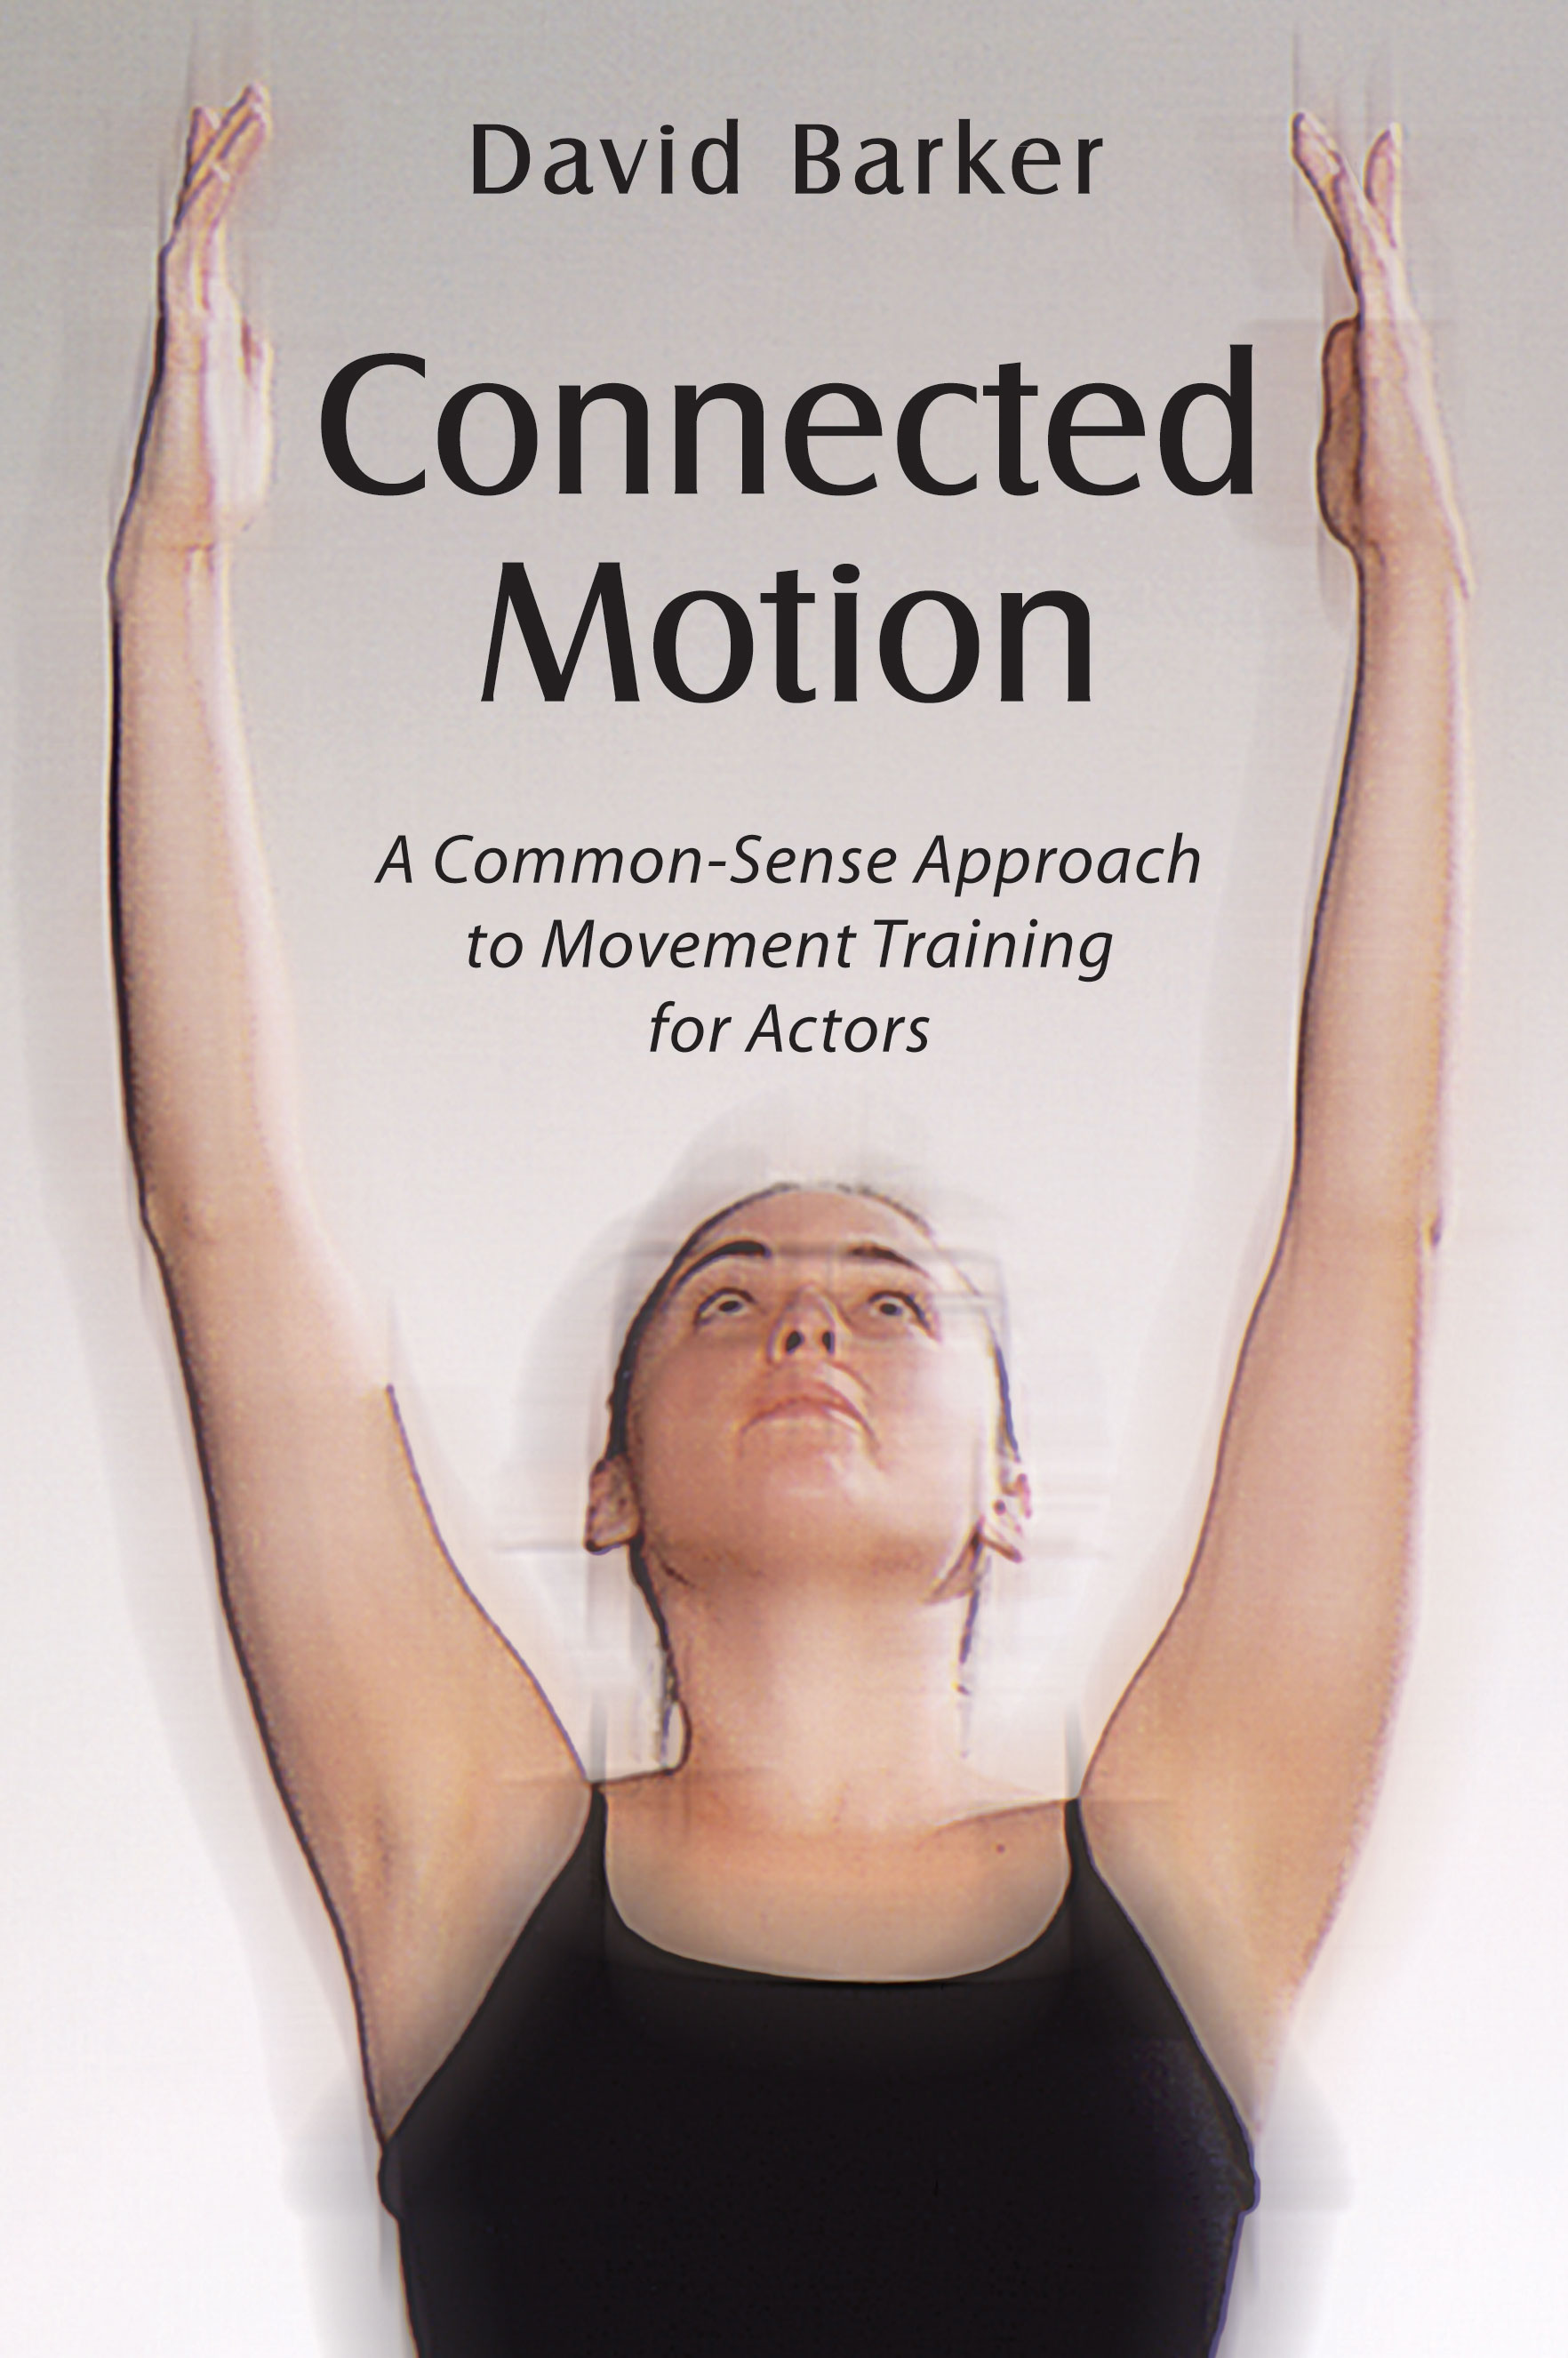 Connected Motion: A Common-Sense Approach to Movement Training for Actors by David  Barker